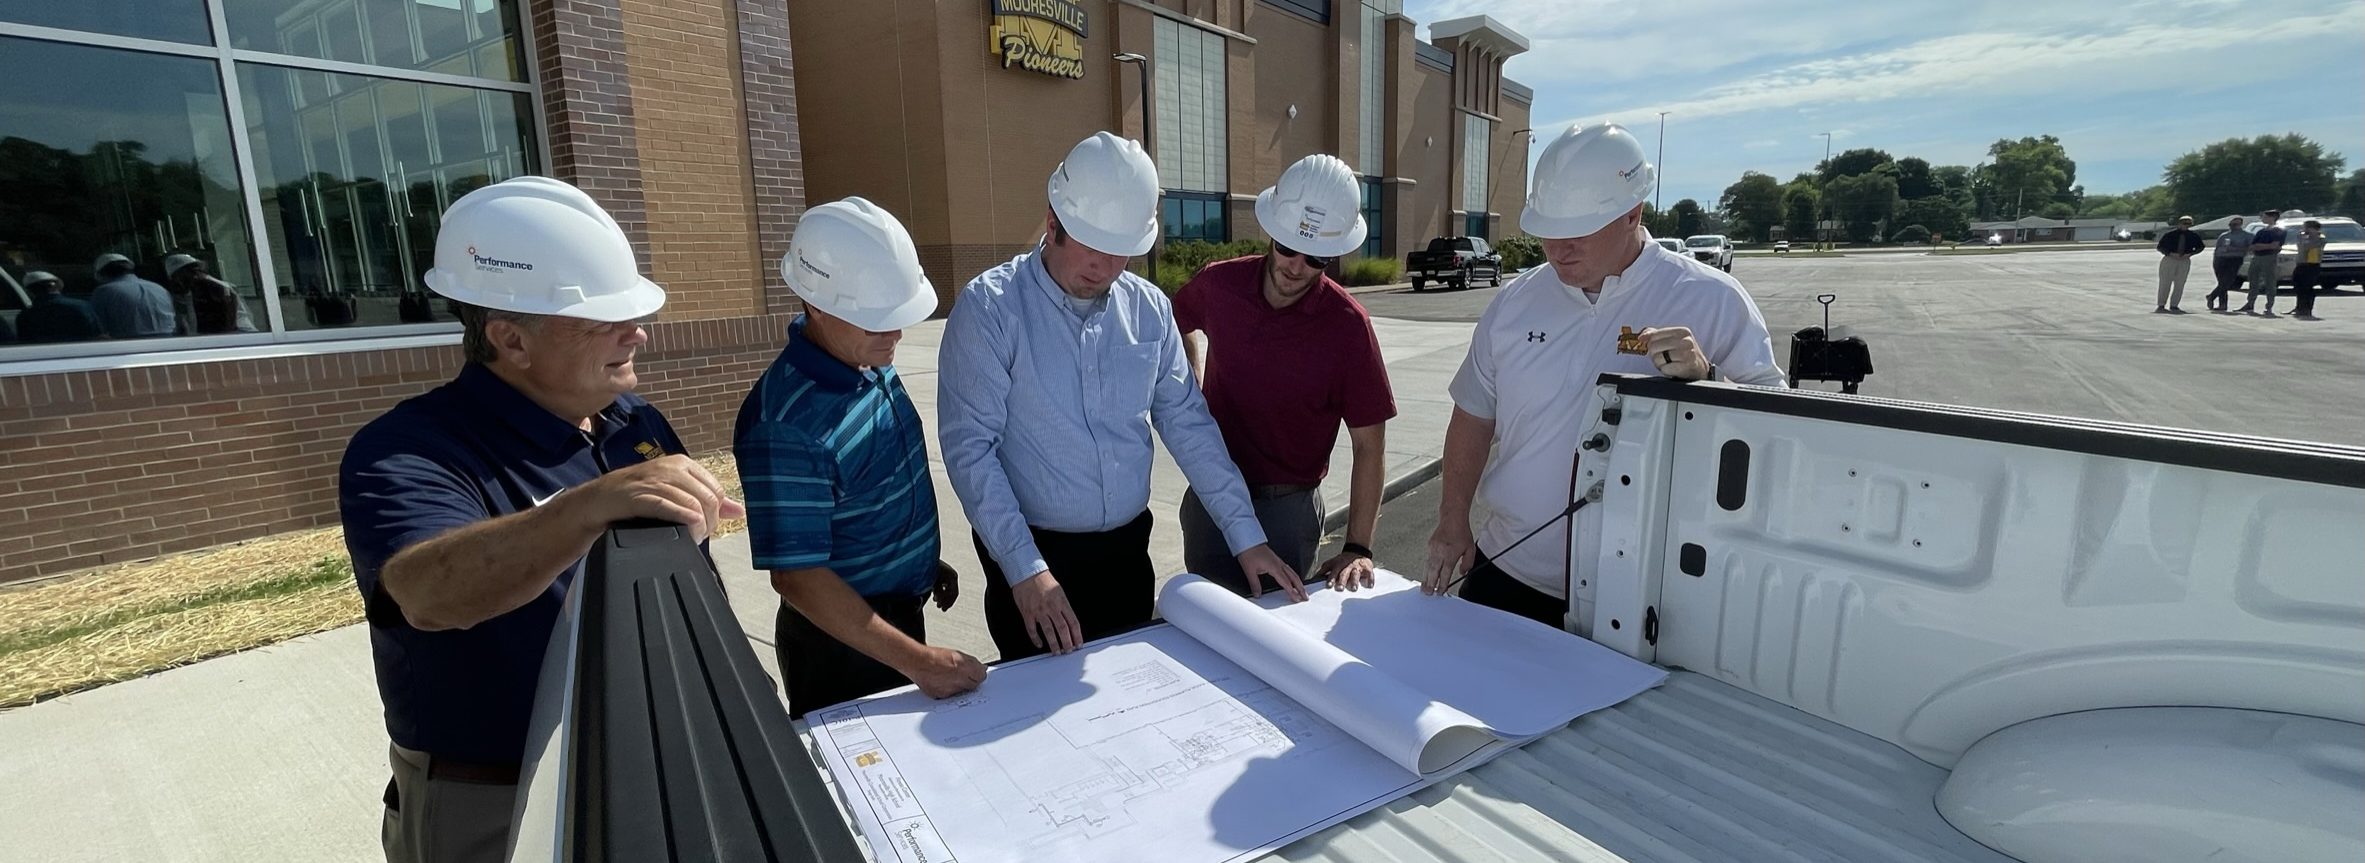 Performance Services team reviewing plans at a jobsite